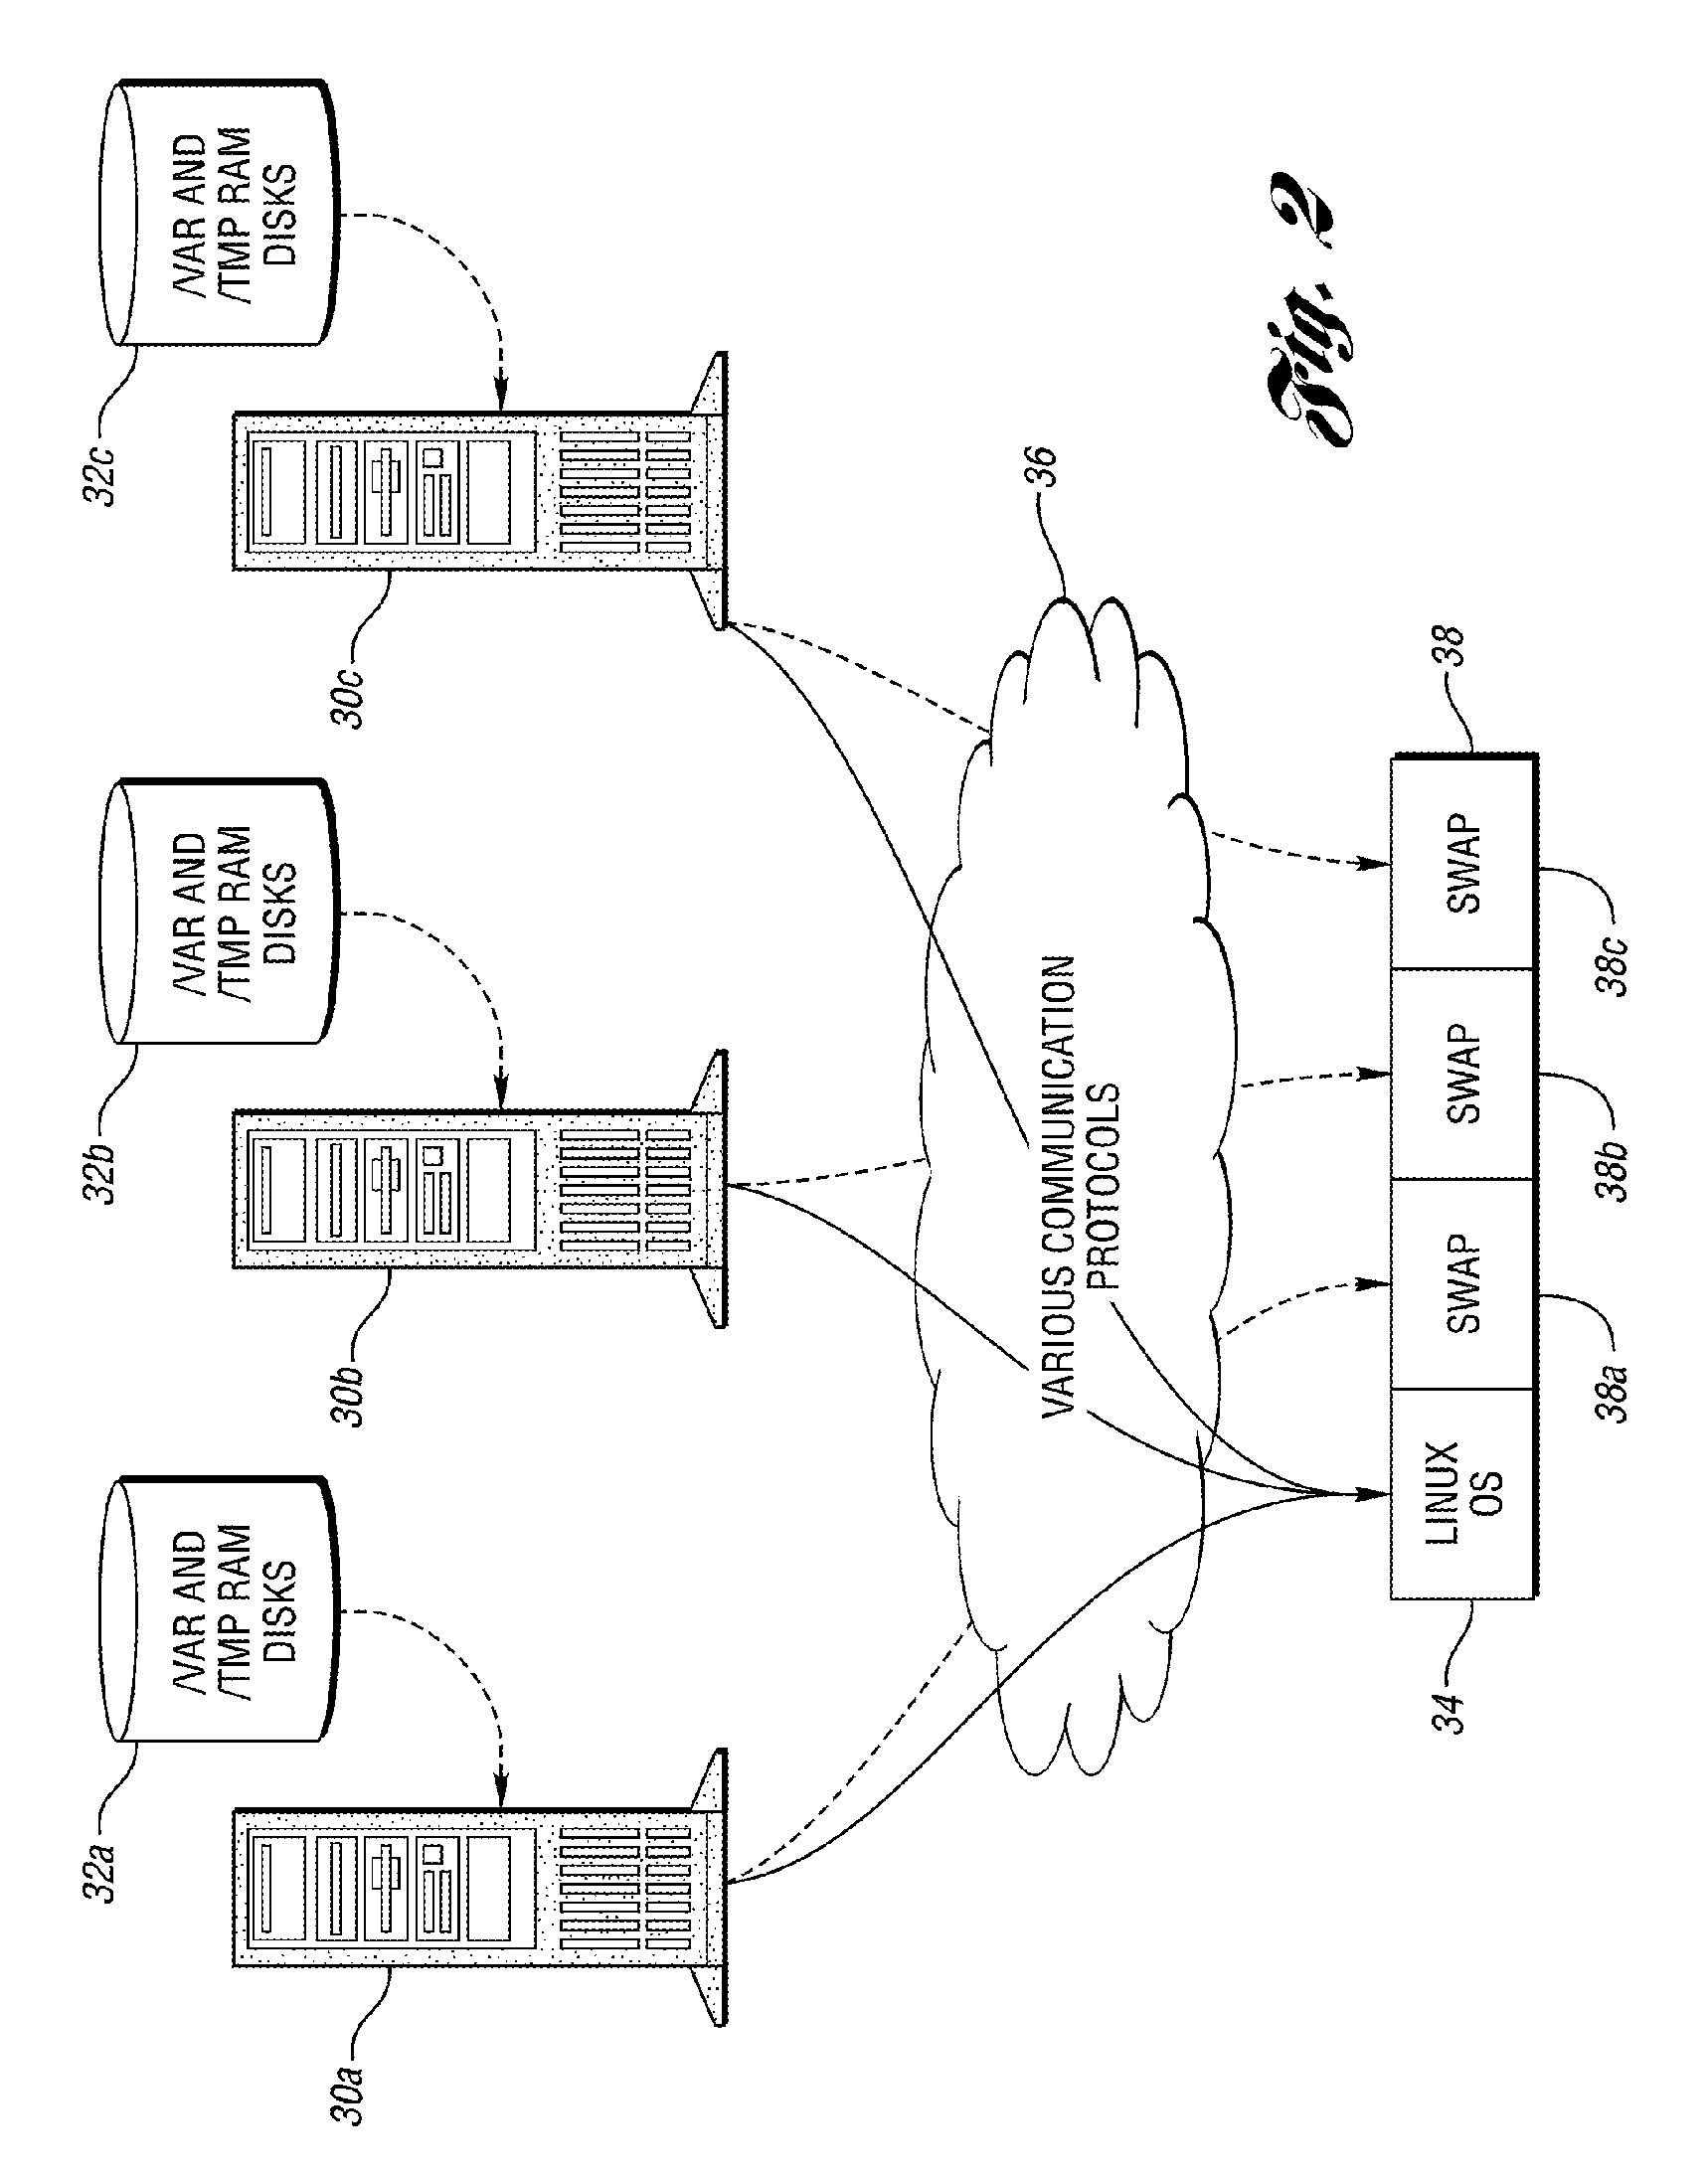 Method and system for booting a plurality of computing systems from an operating system image